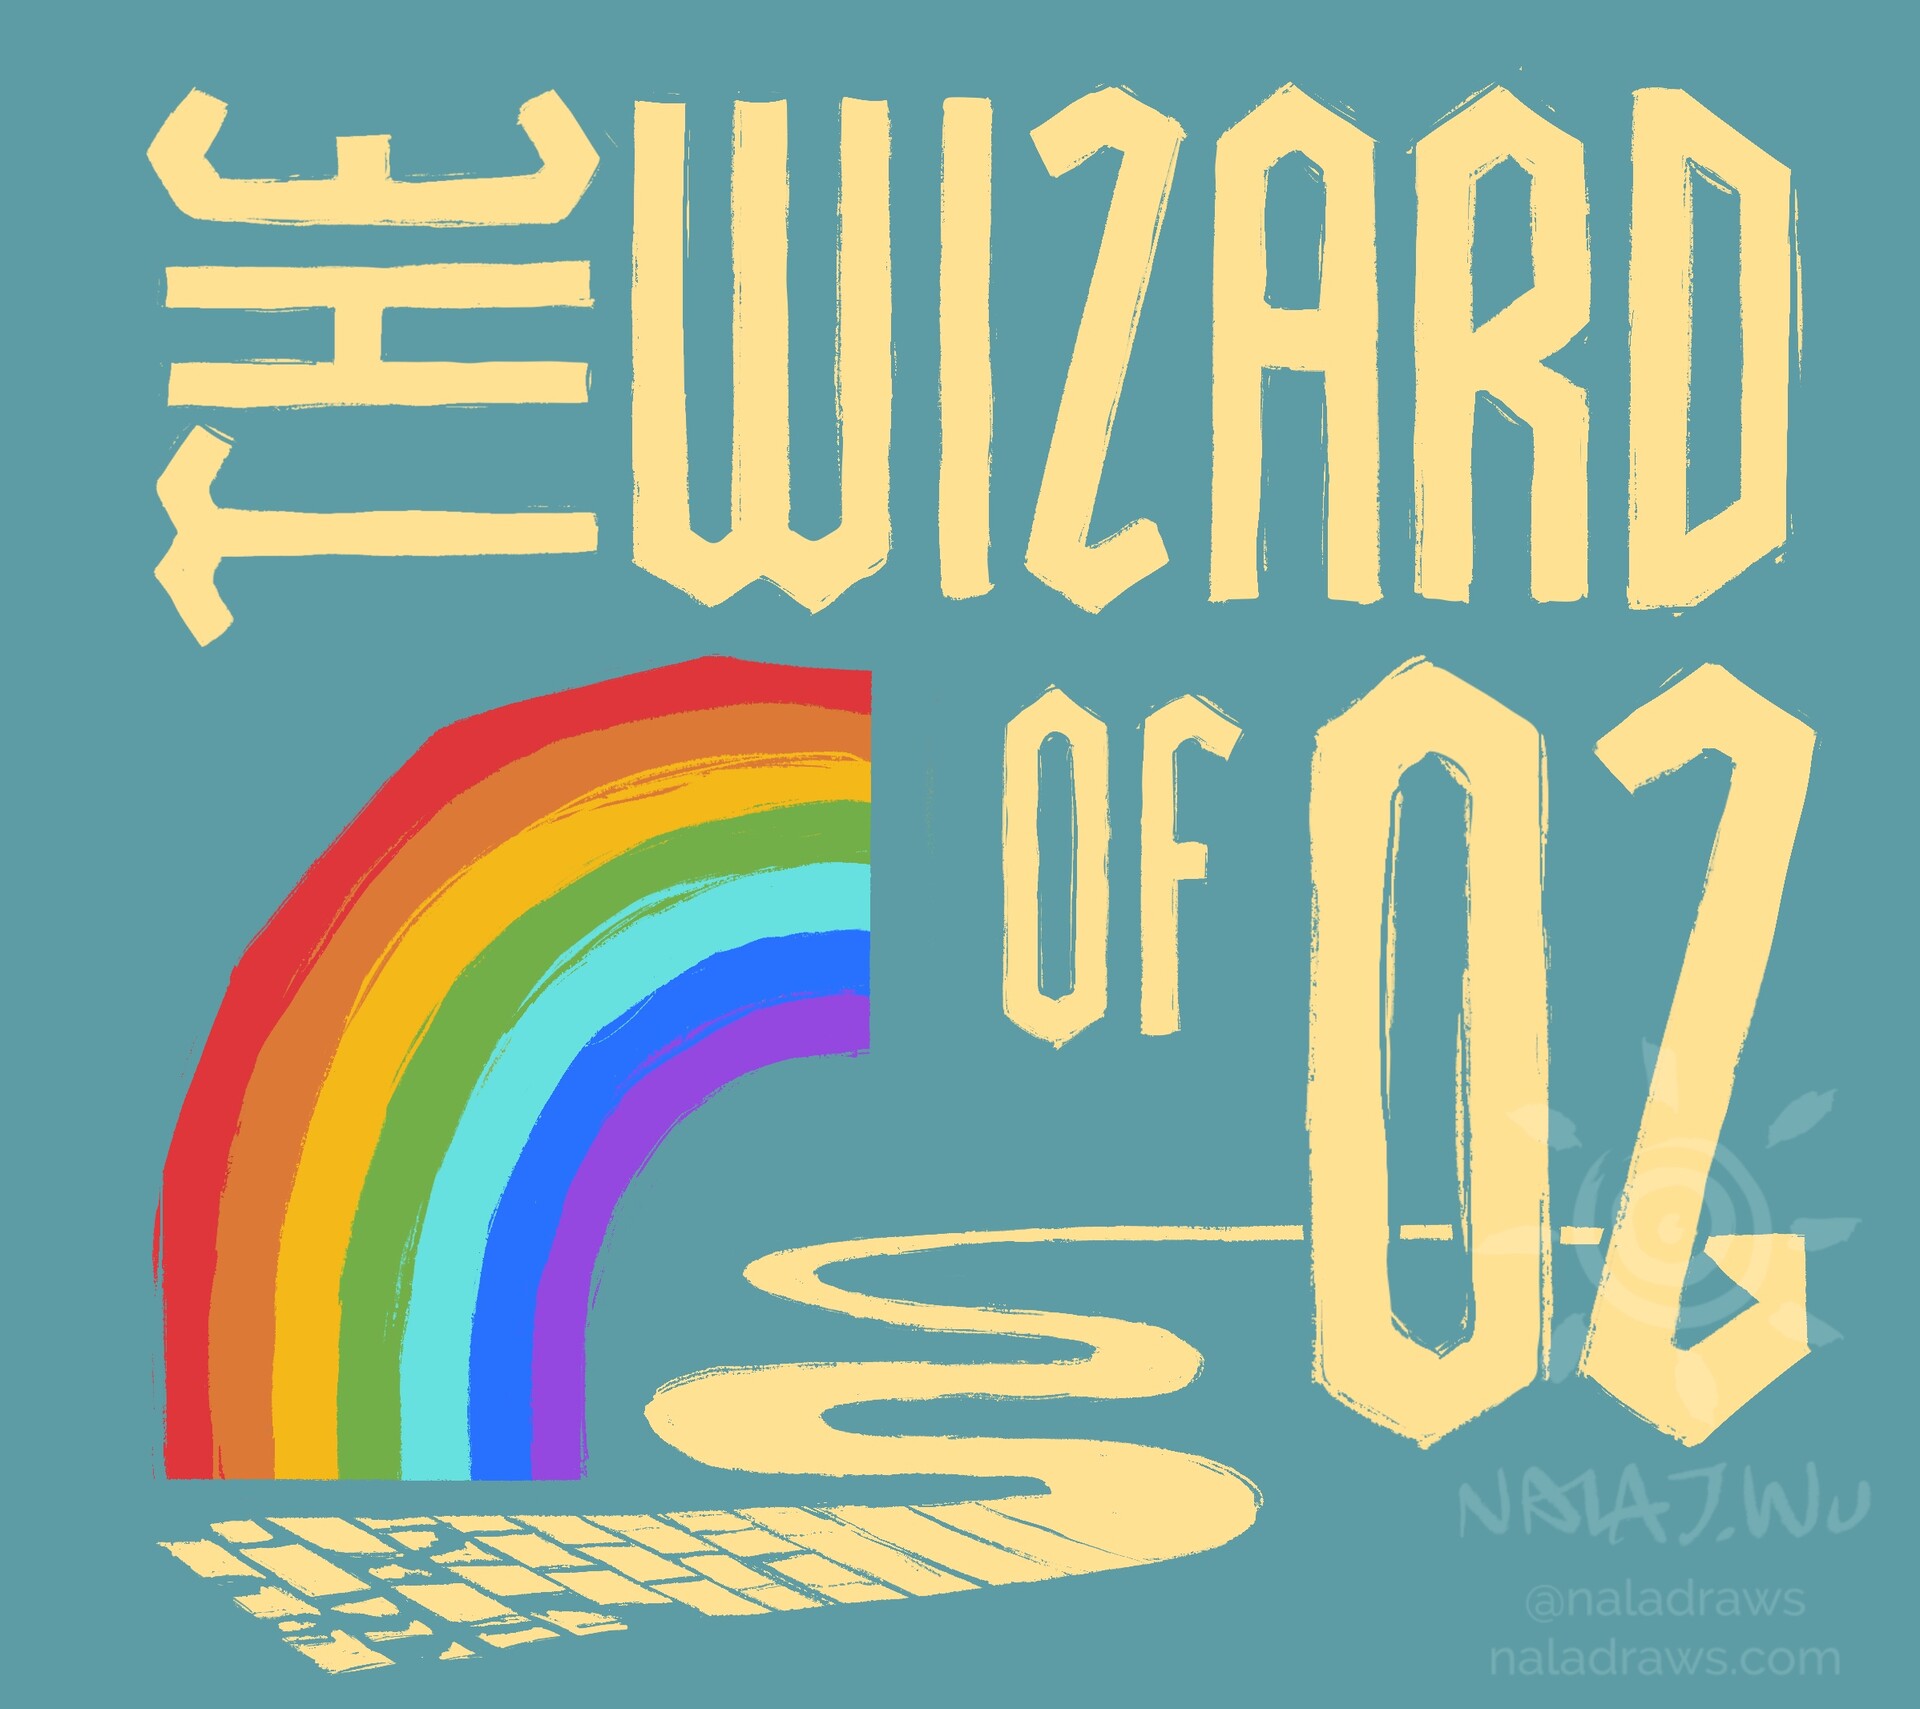 Title Design - The Wizard of Oz